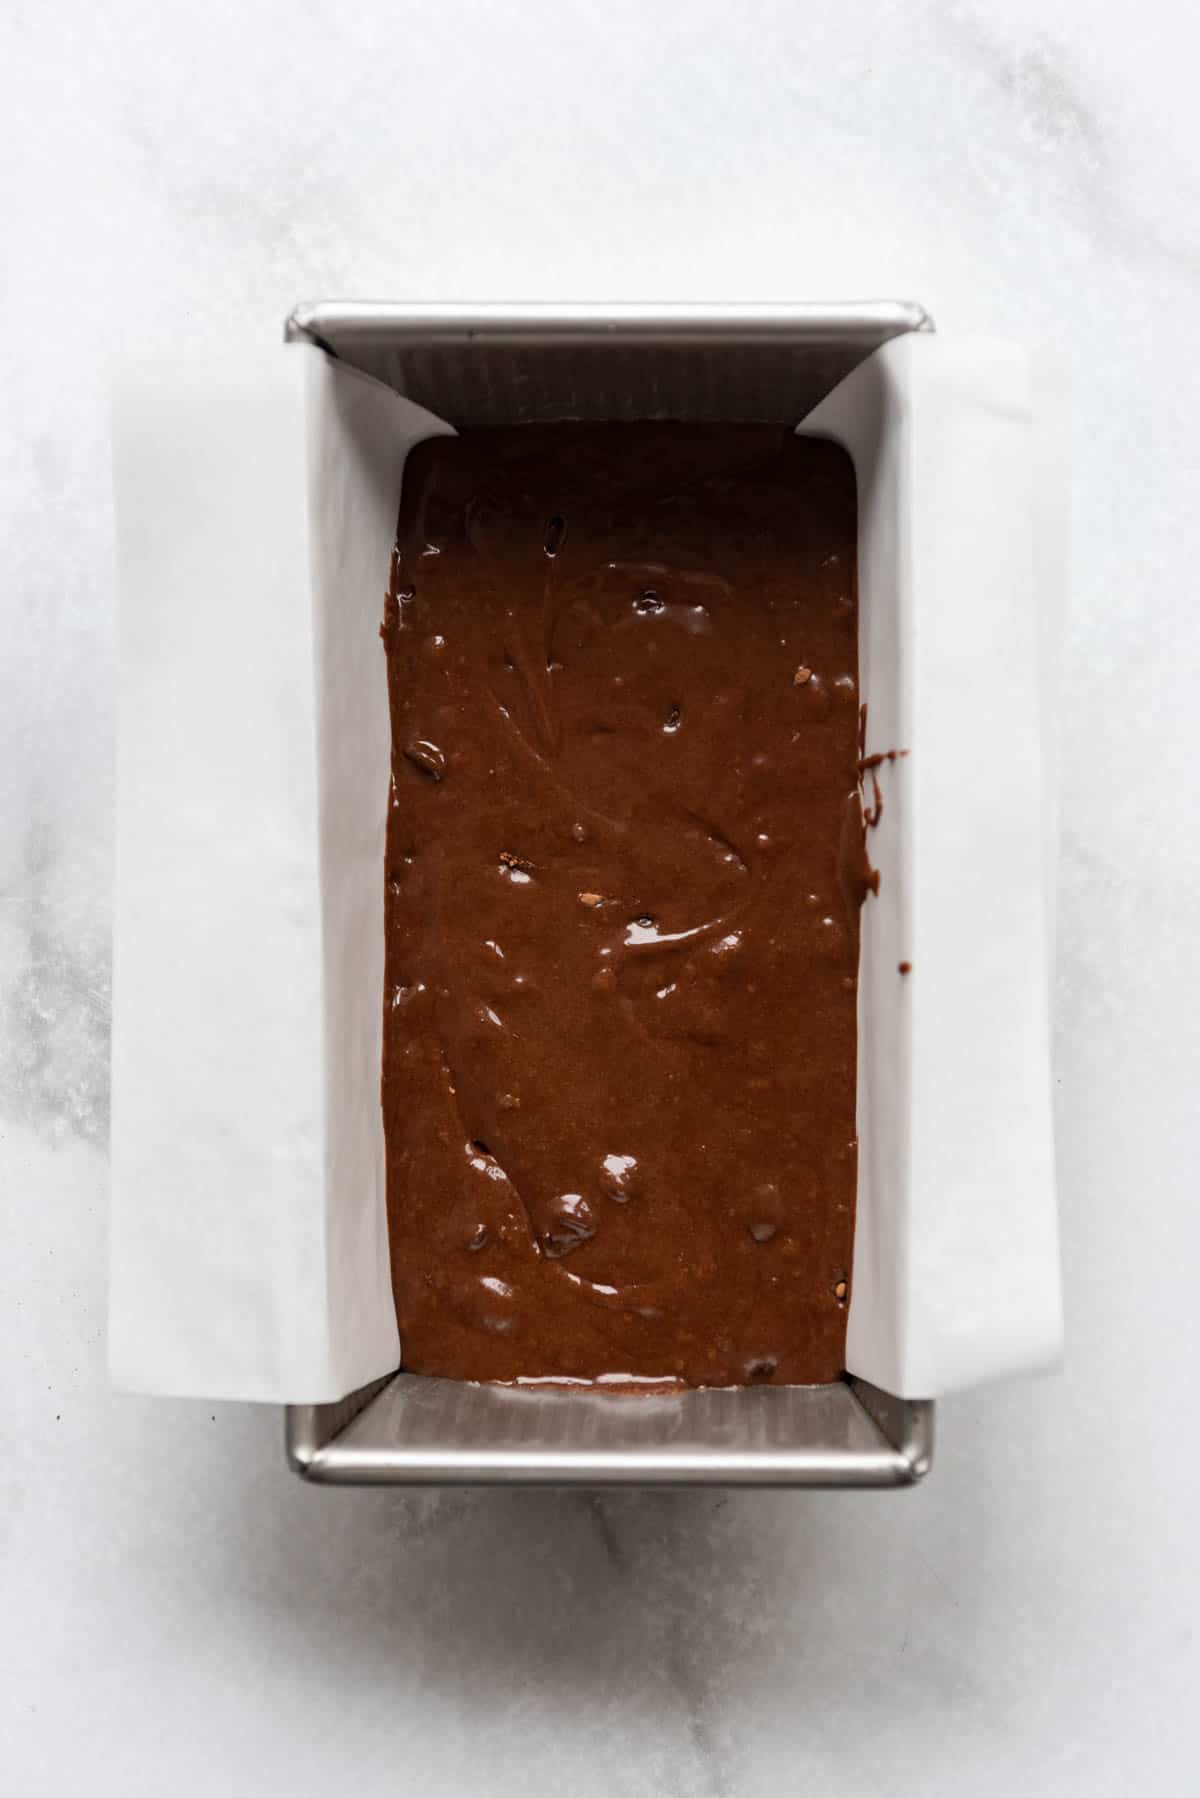 Brownie batter in a loaf pan with parchment paper sling.